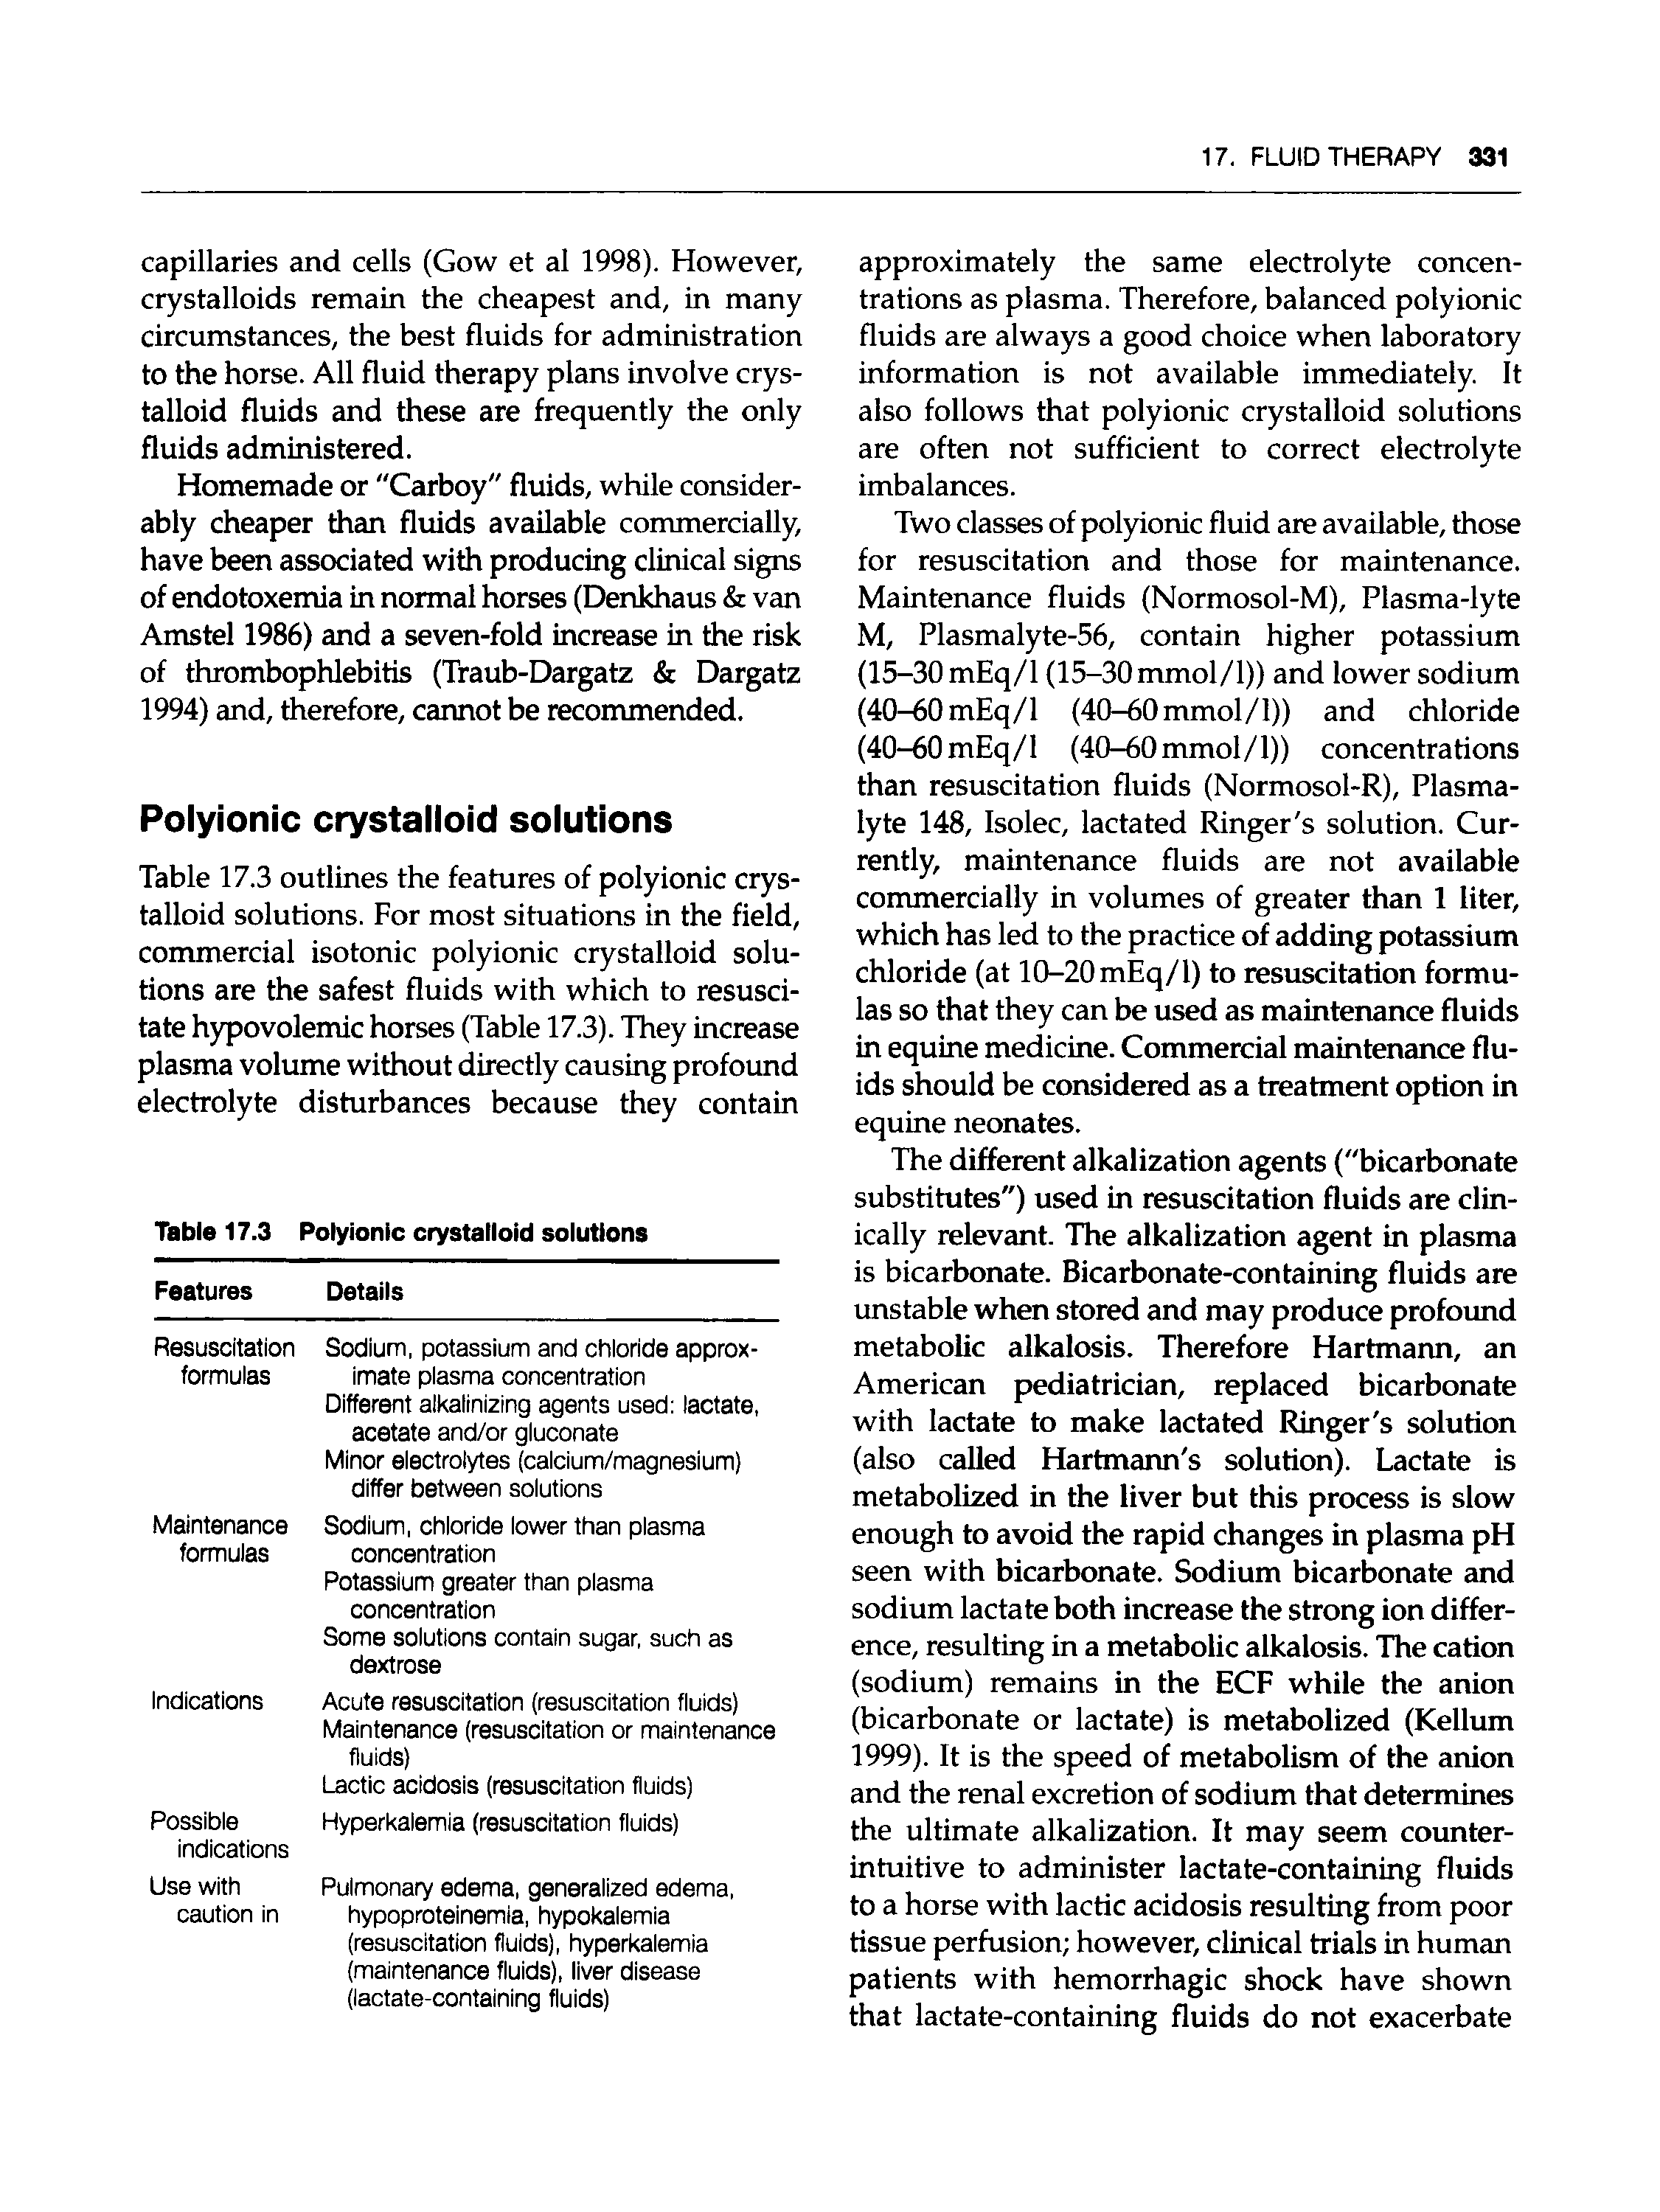 Table 17.3 outlines the features of polyionic crystalloid solutions. For most situations in the field, commercial isotonic polyionic crystalloid solutions are the safest fluids with which to resuscitate hypovolemic horses (Table 17.3). They increase plasma volume without directly causing profound electrolyte disturbances because they contain...